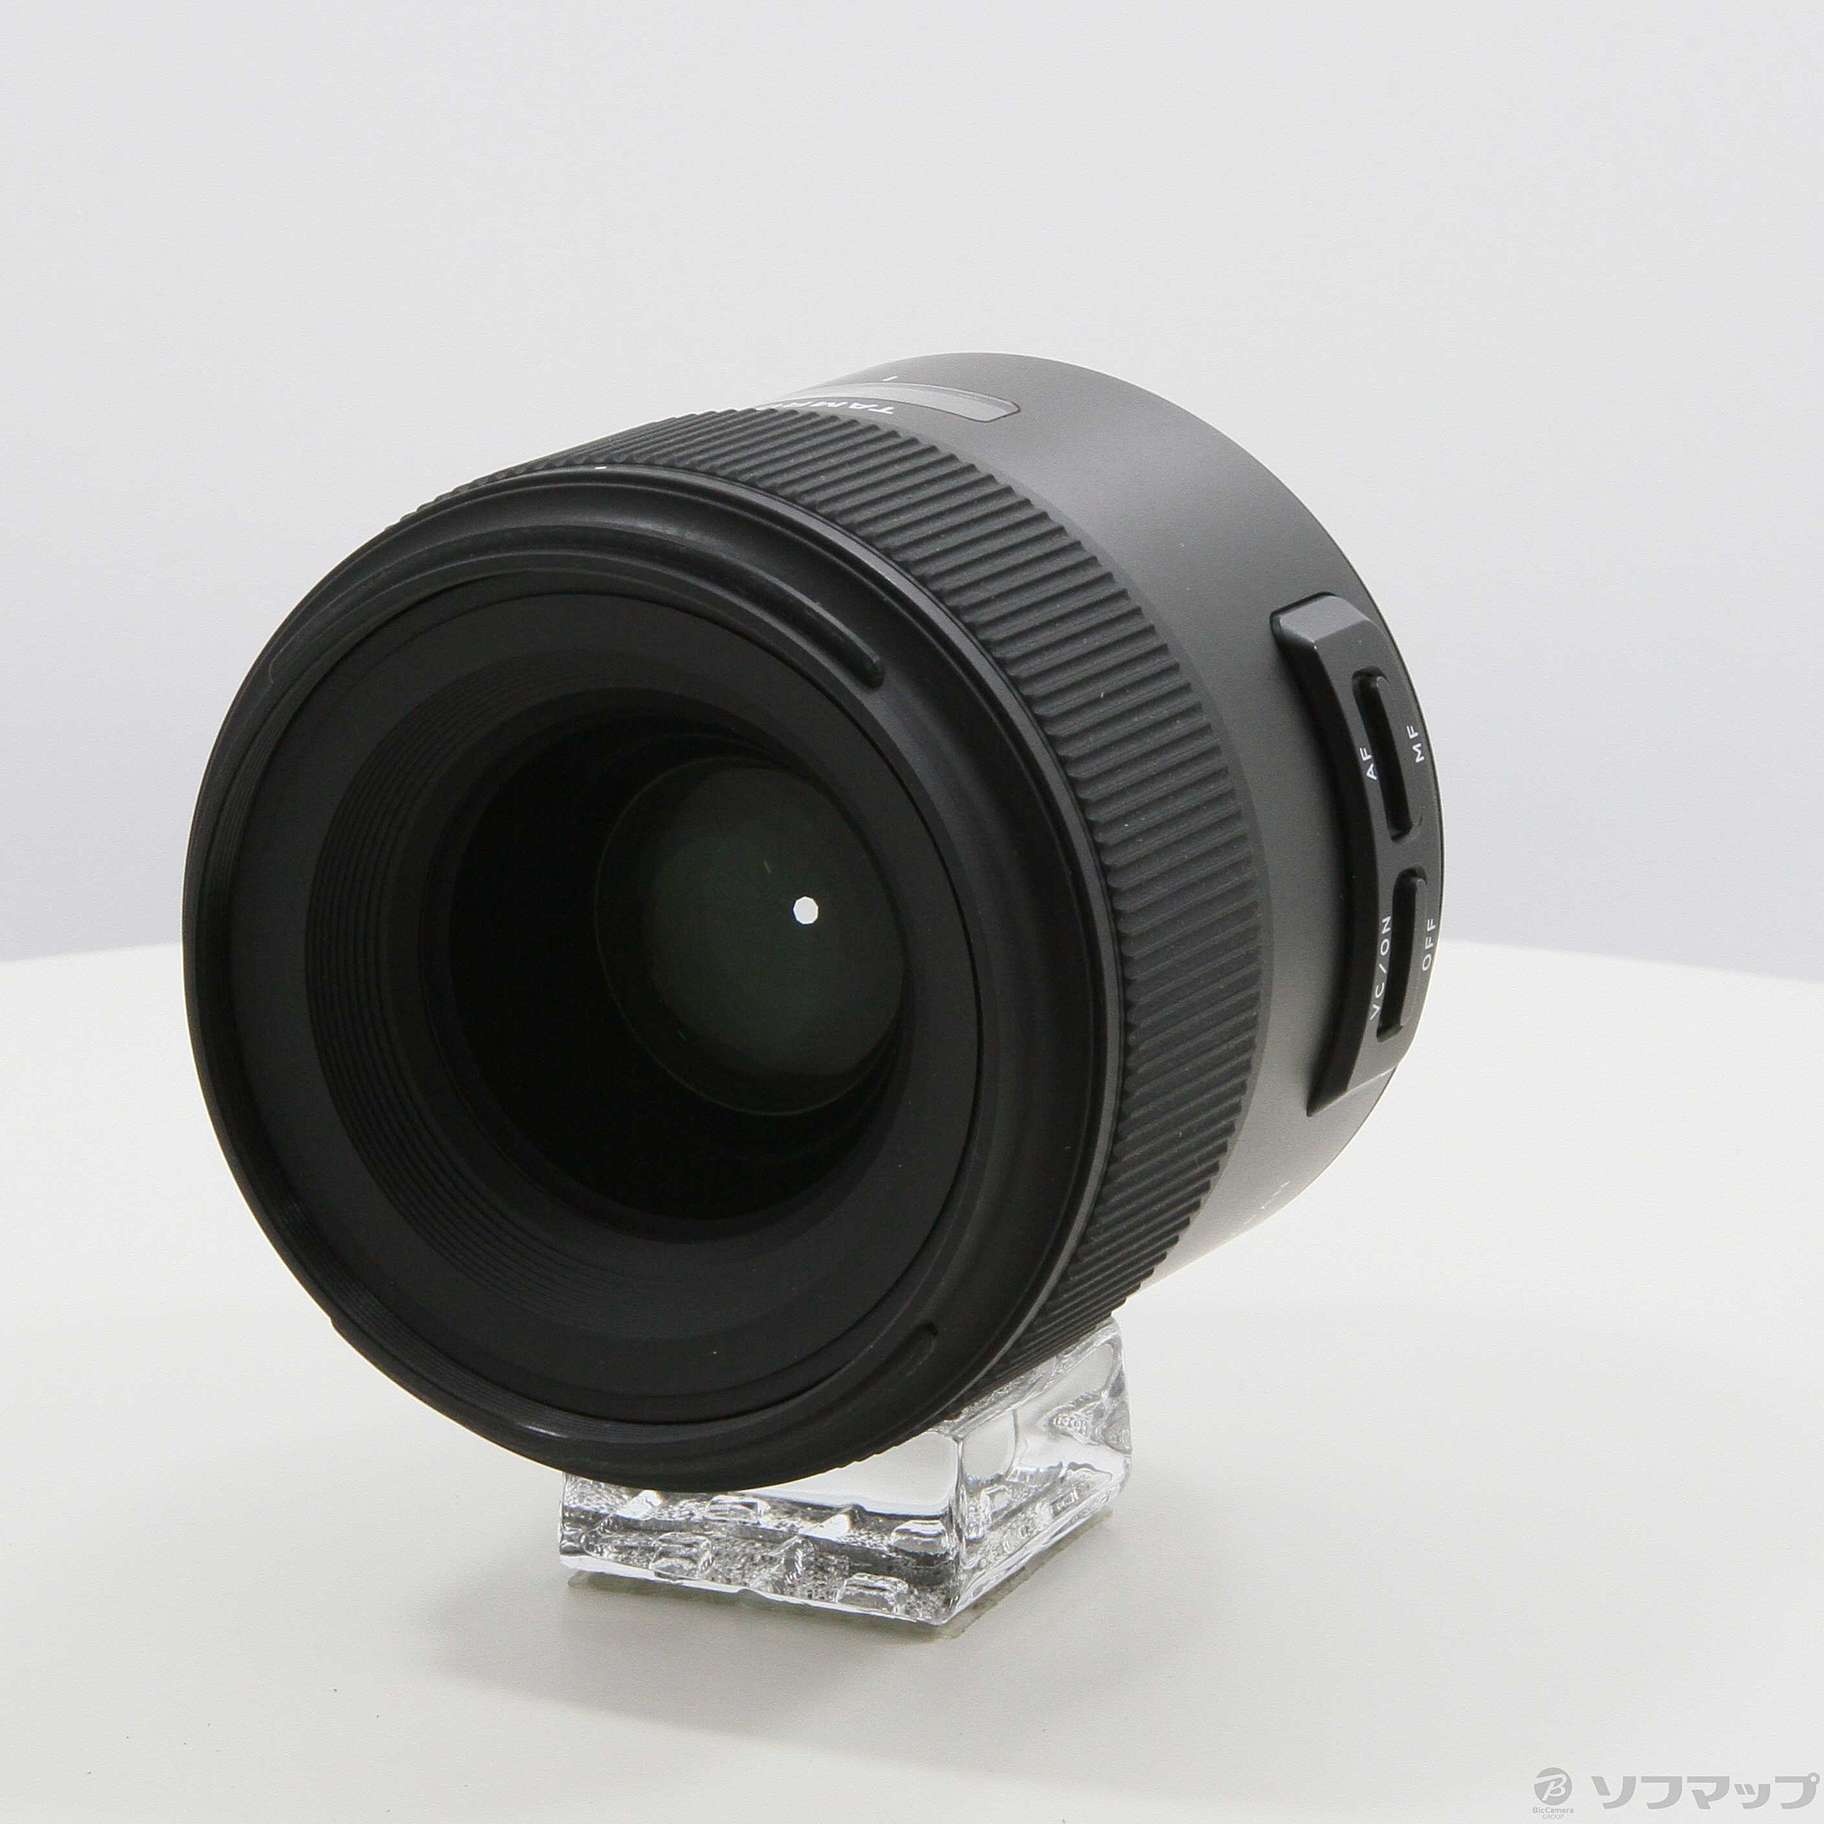 TAMRON SP 45mm F/1.8 Di VC USD ニコン用F013N-